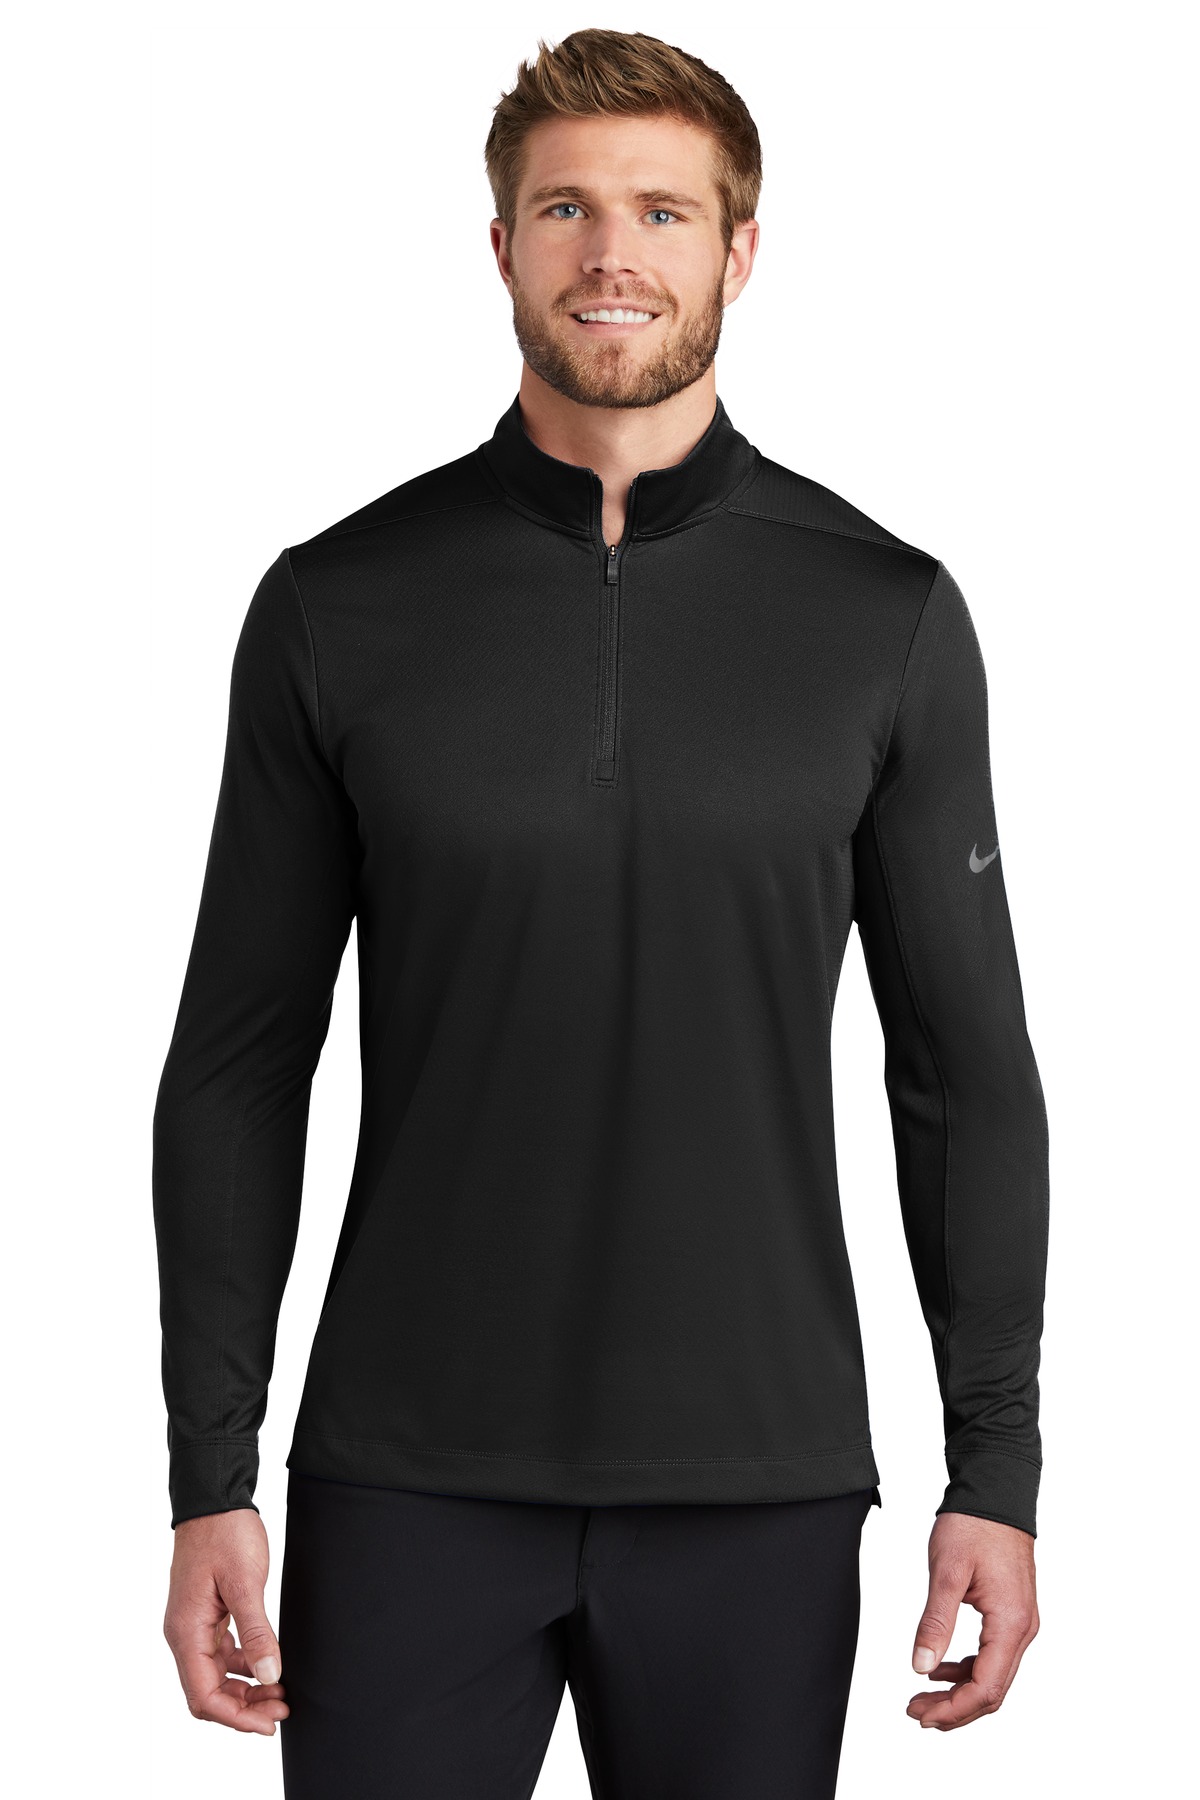 Nike Dry 1/2-Zip Cover-Up-